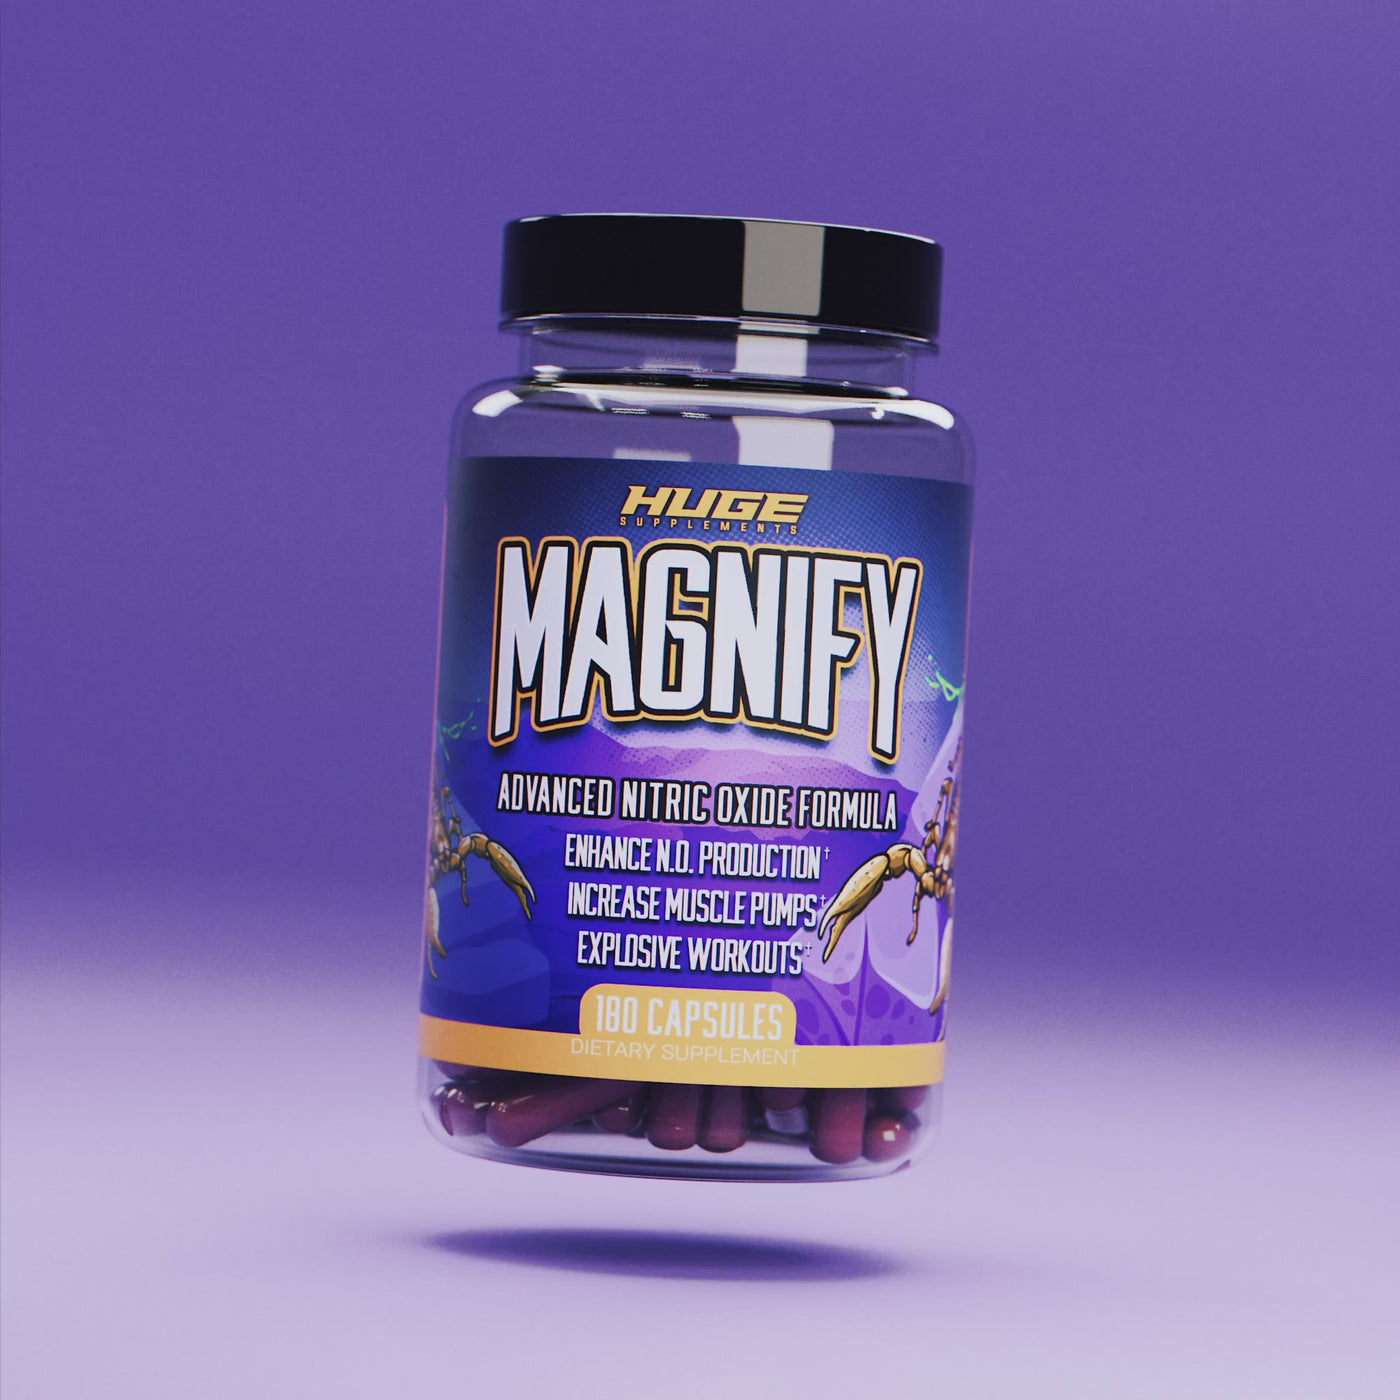 Magnify Nitric Oxide Booster Explained